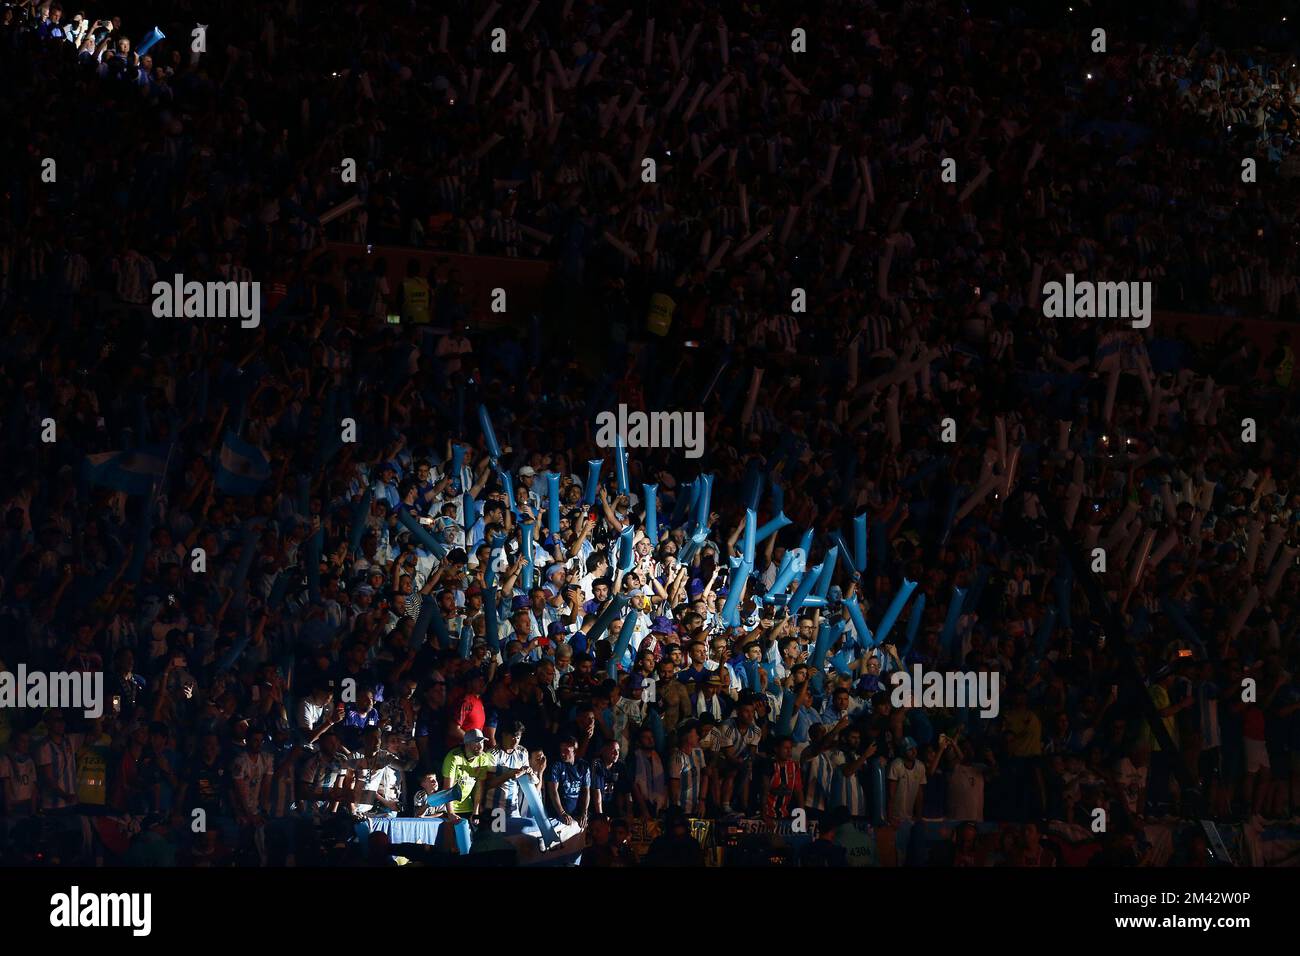 LUSAIL, QATAR - DECEMBER 18: Supporters of Argentina celebrate before the FIFA World Cup Qatar 2022 Final match between Argentina and France at Lusail Stadium on December 18, 2022 in Lusail, Qatar. (Photo by Florencia Tan Jun/PxImages) Credit: Px Images/Alamy Live News Stock Photo